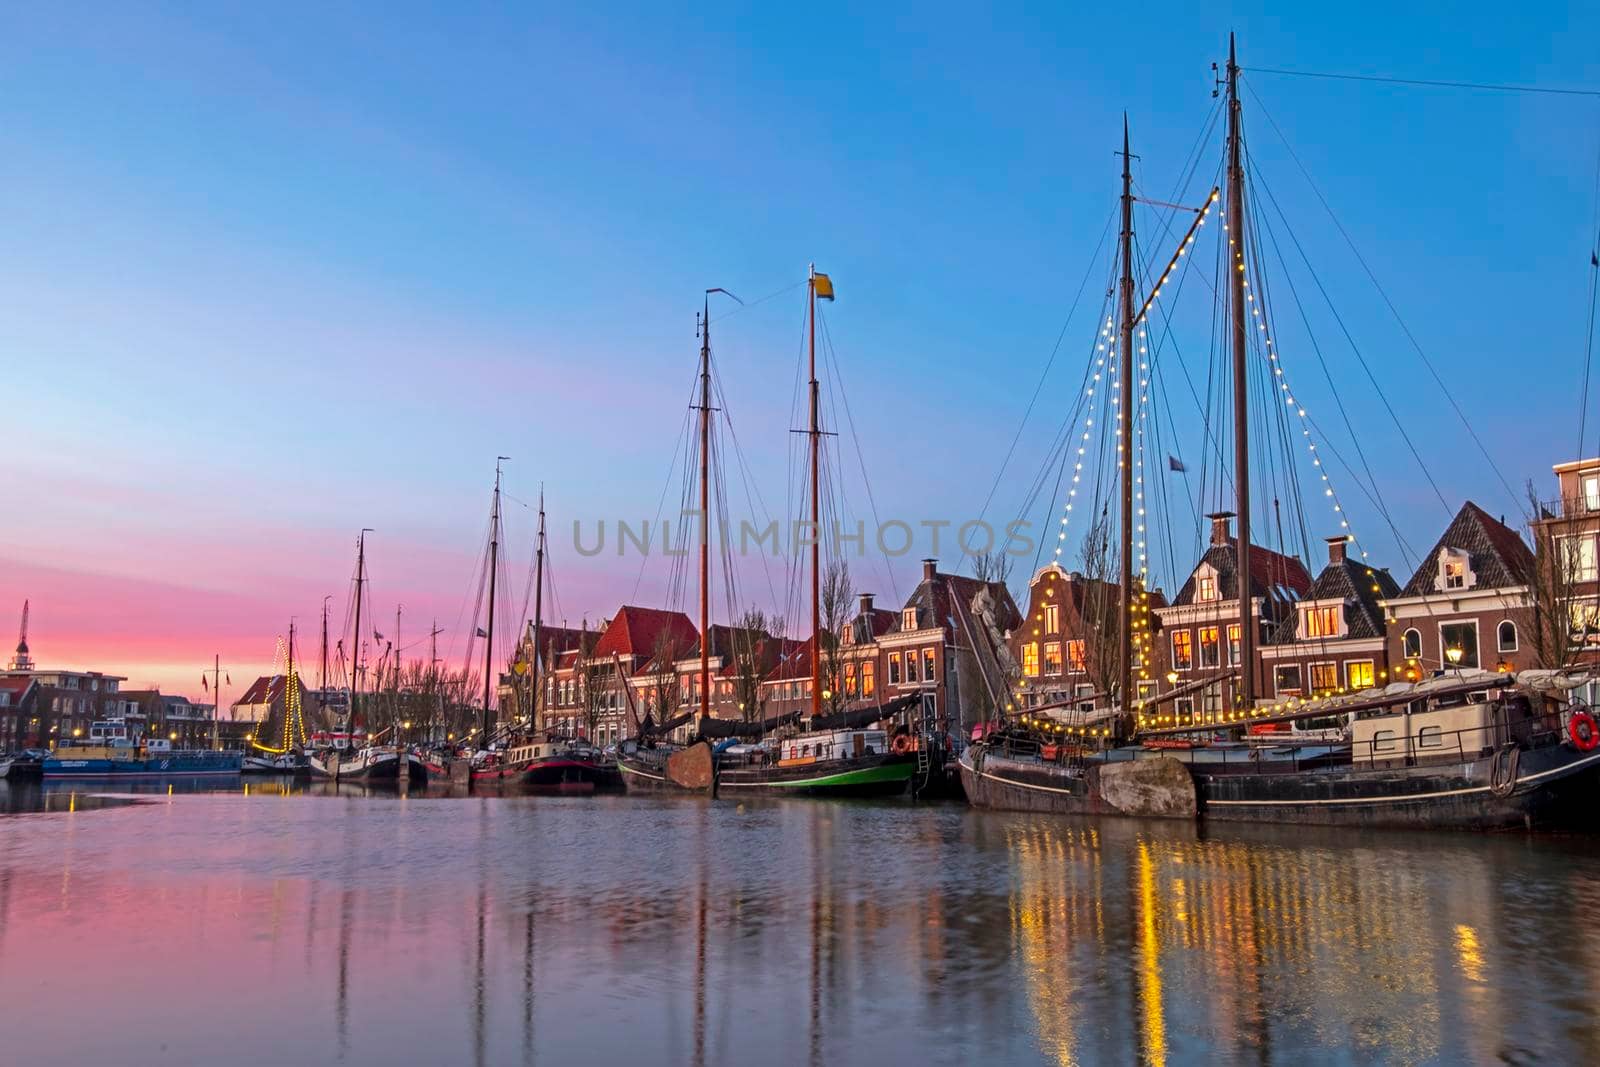 Harbor from Harlingen in Friesland the Netherlands at sunset by devy